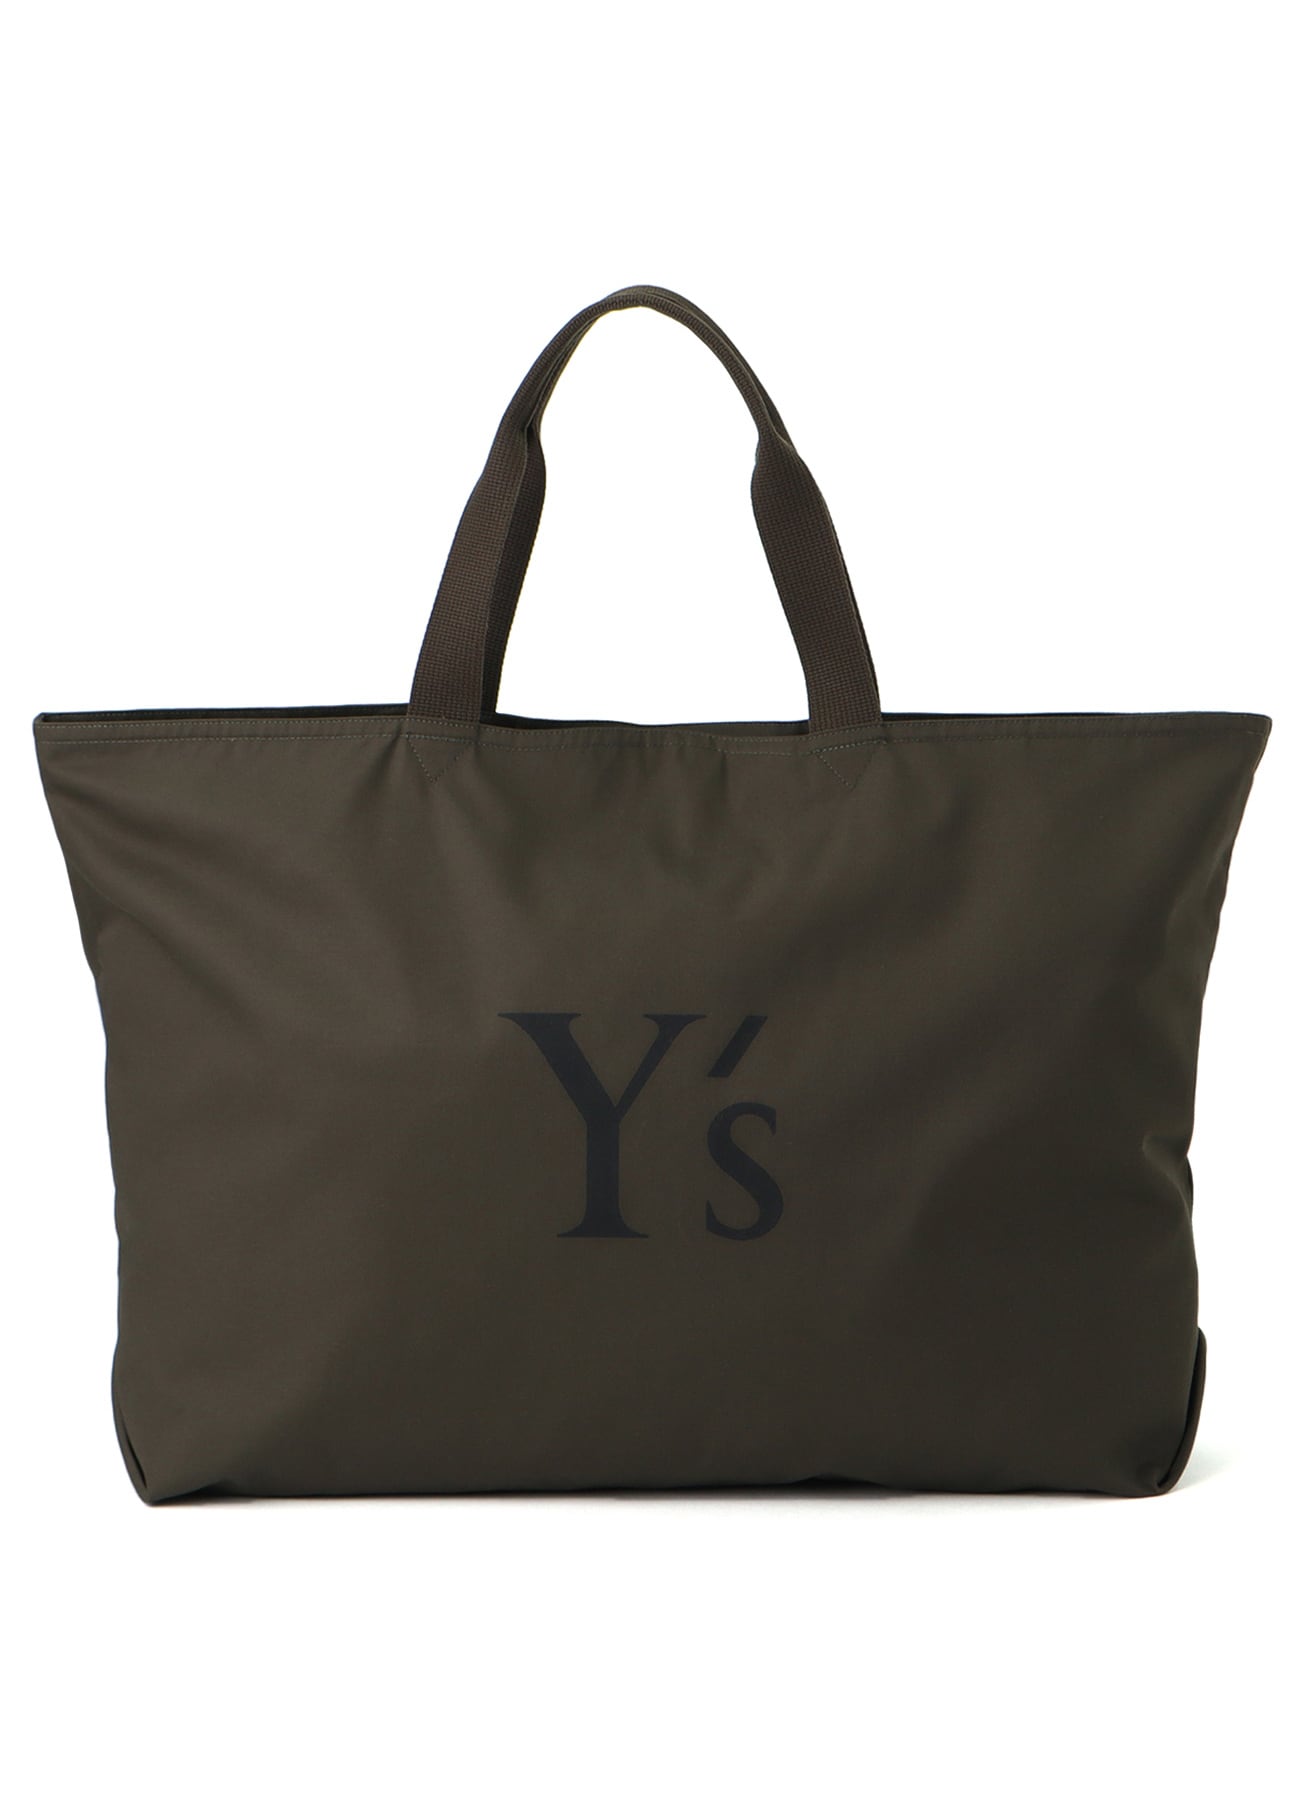 POLYESTER COTTON TWILL LEASE BAG